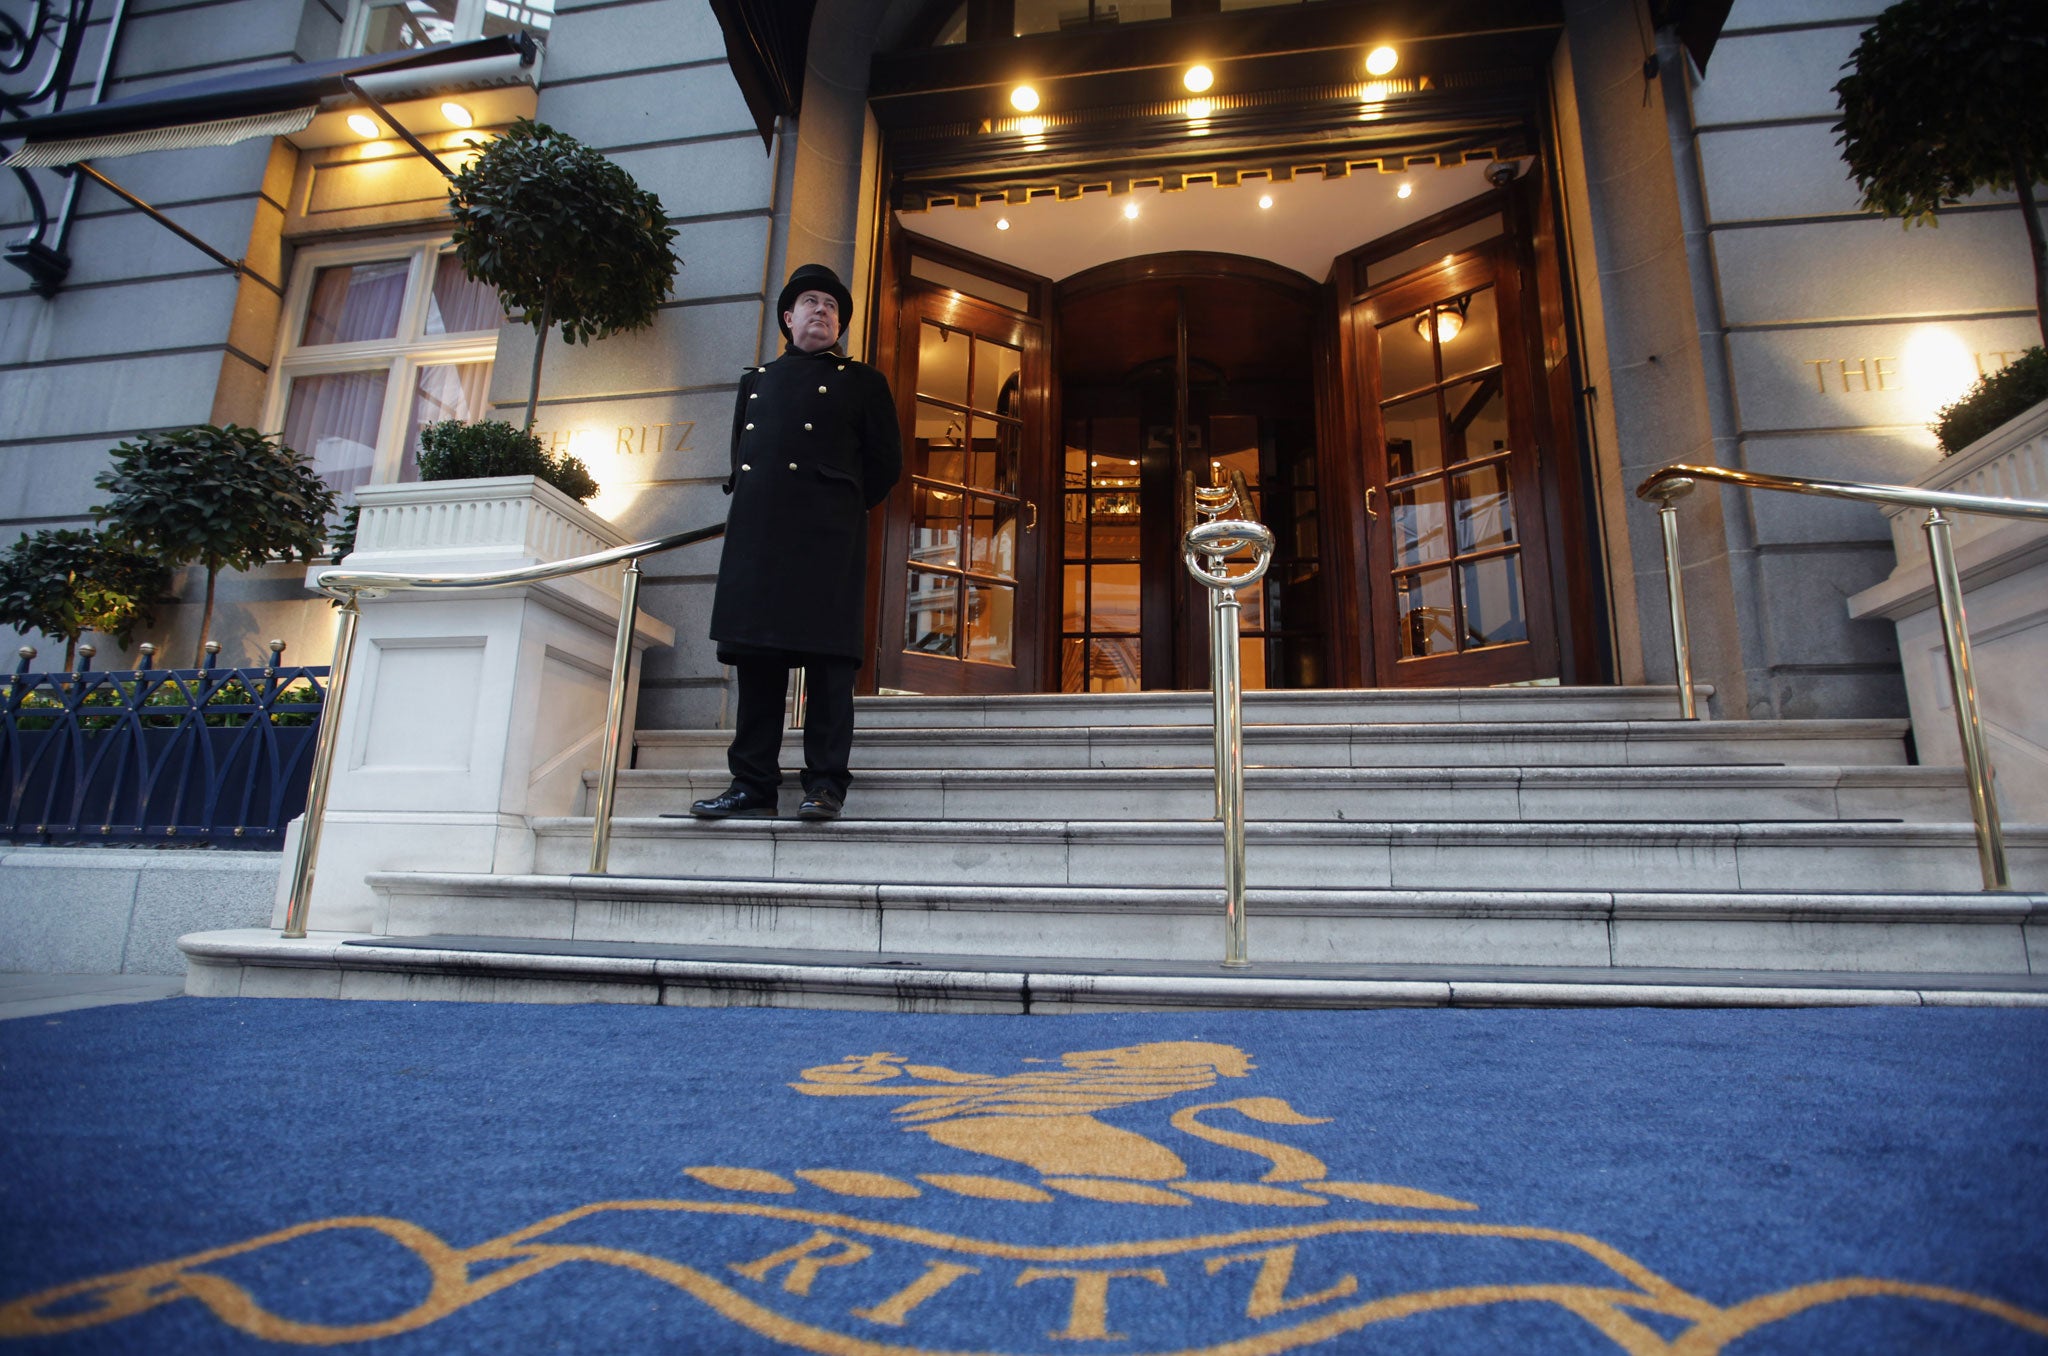 A doorman stands at the entrance to The Ritz Hotel on February 21, 2011 in London, England.